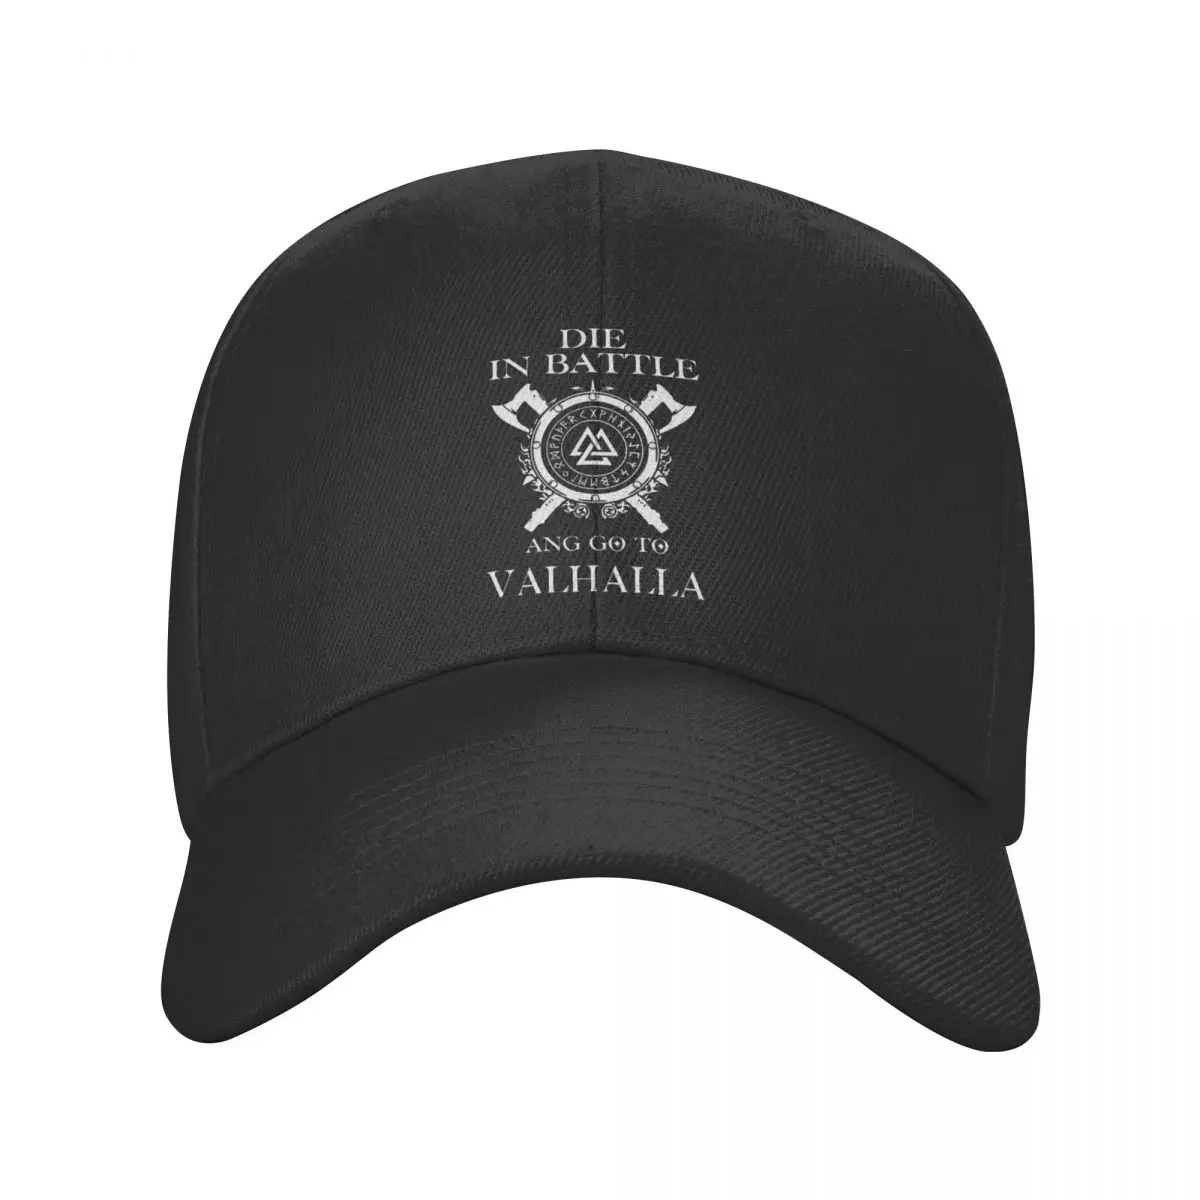 

Classic Die In Battle And Go To Valhalla Baseball Cap Personalized Adjustable Unisex Viking Odin Dad Hat Outdoor Snapback Caps